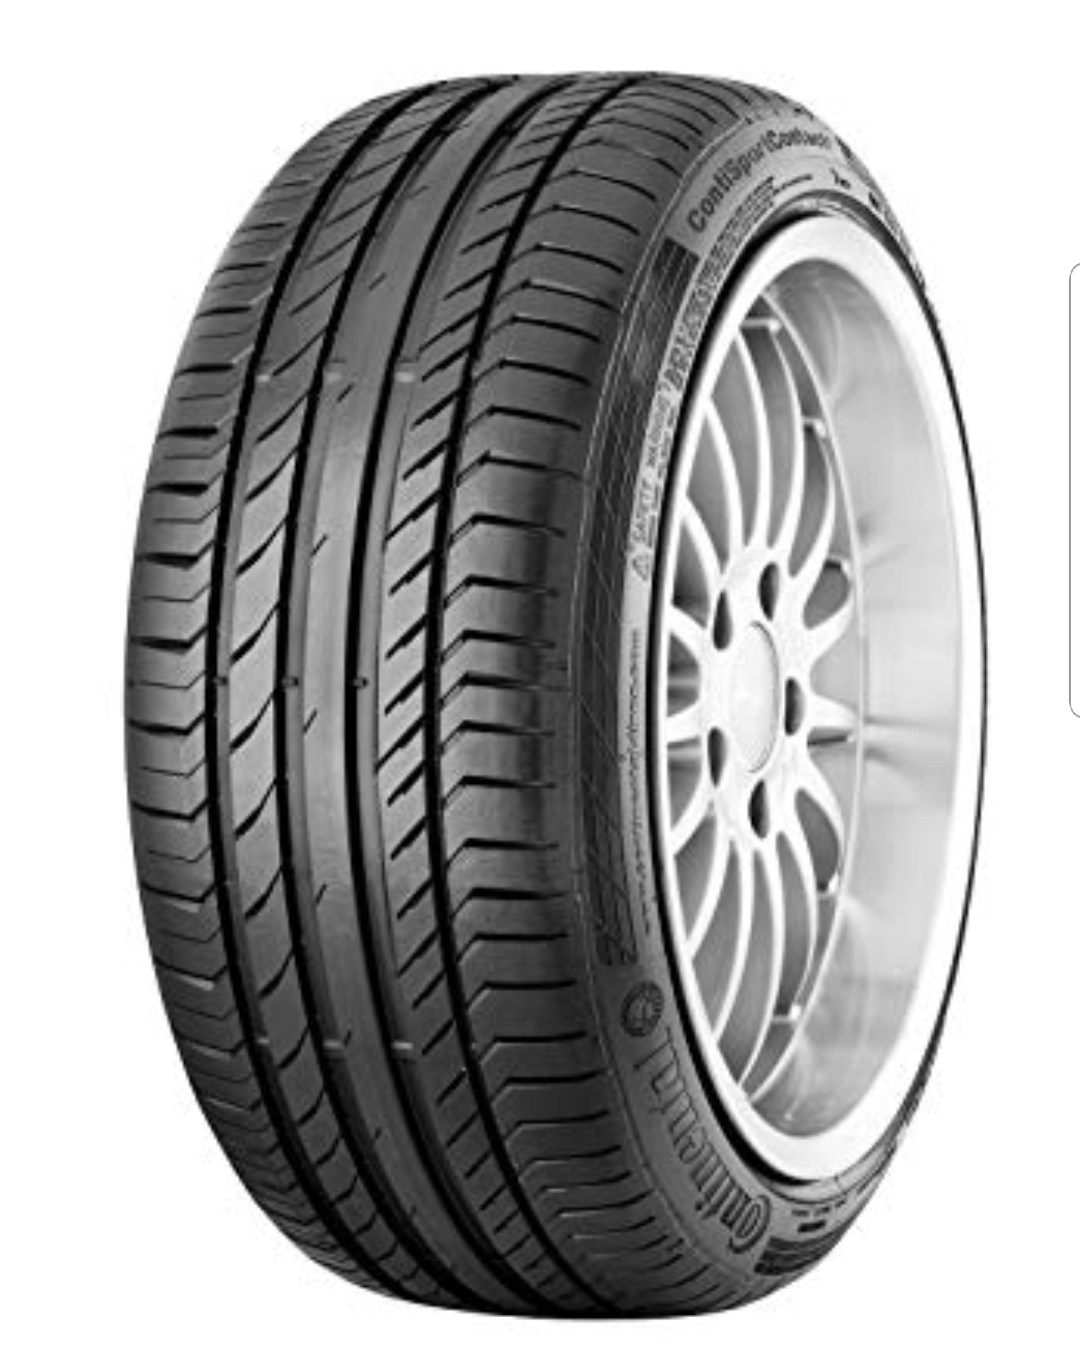 4X Conti Sportscontact 5 225/45r17